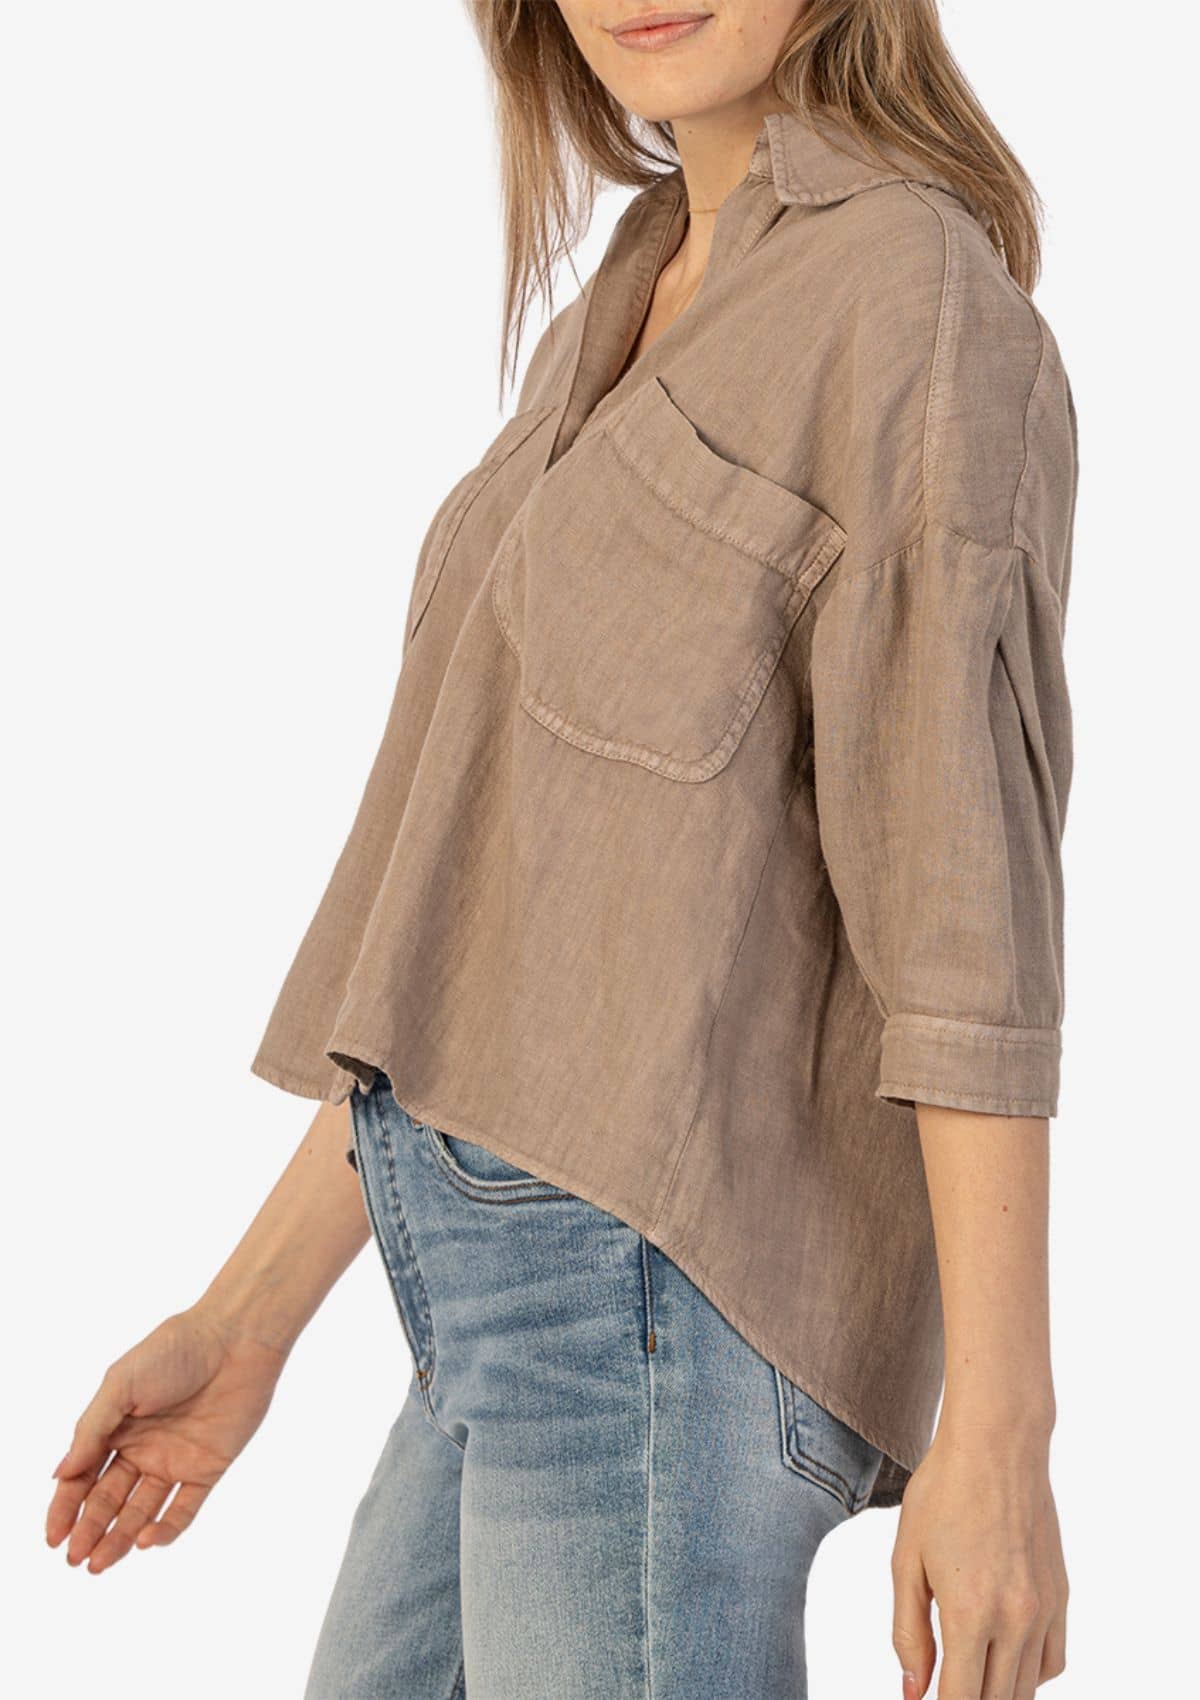 Buttondown Shirts-Casual Tops-Clothing-Ruby Jane.